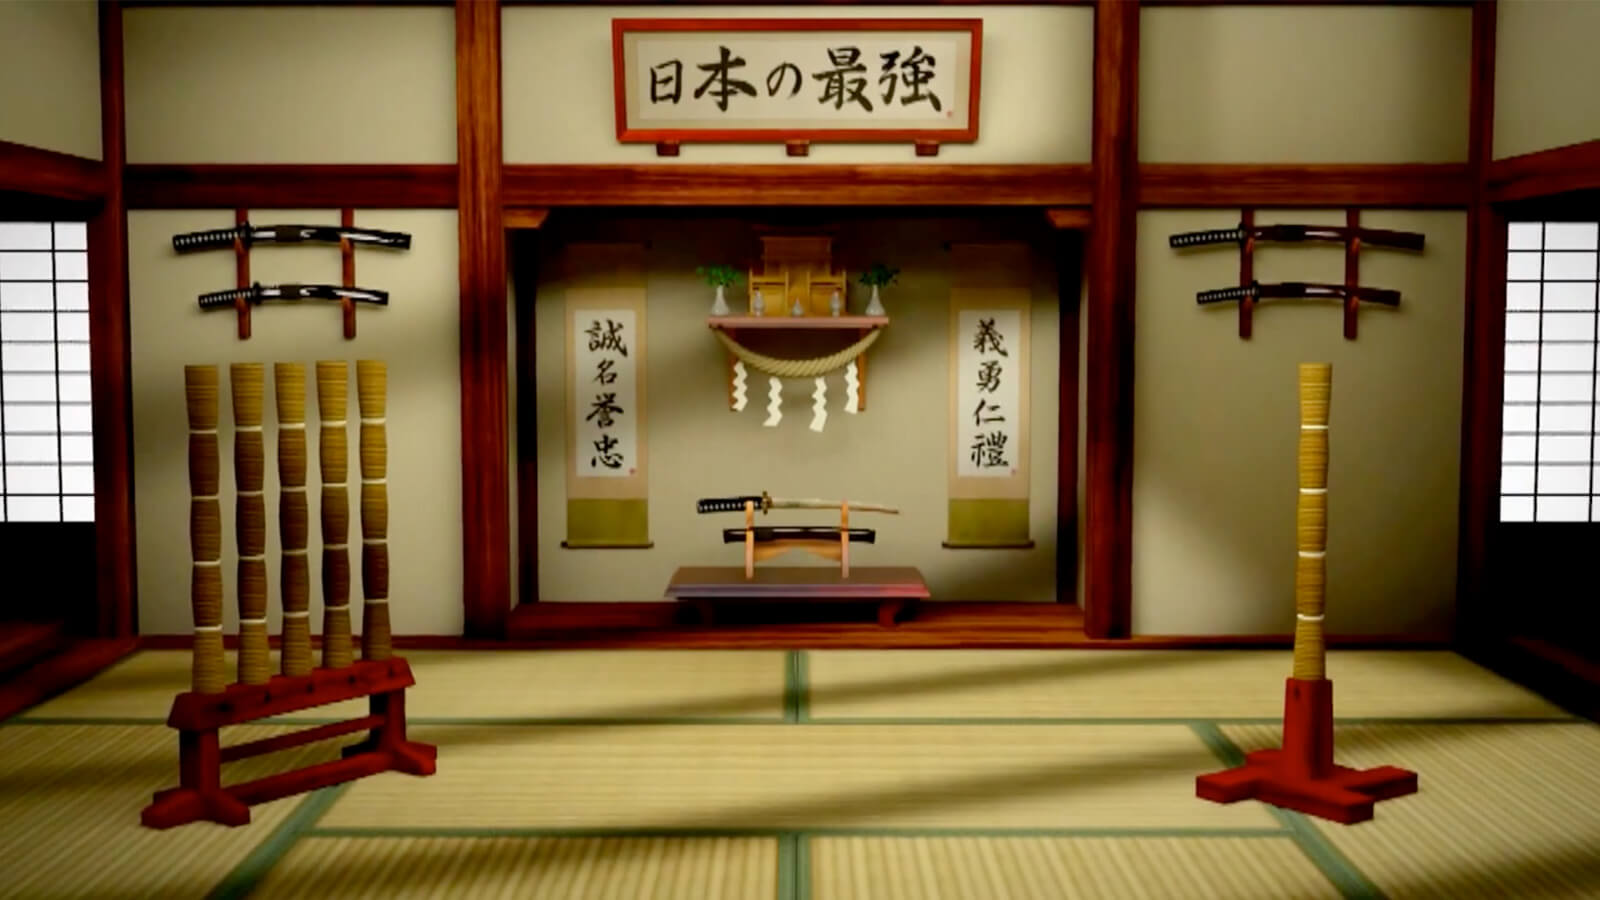 A traditionally decorated samurai training area in a paper-walled room lined with tatami mats and displayed swords.